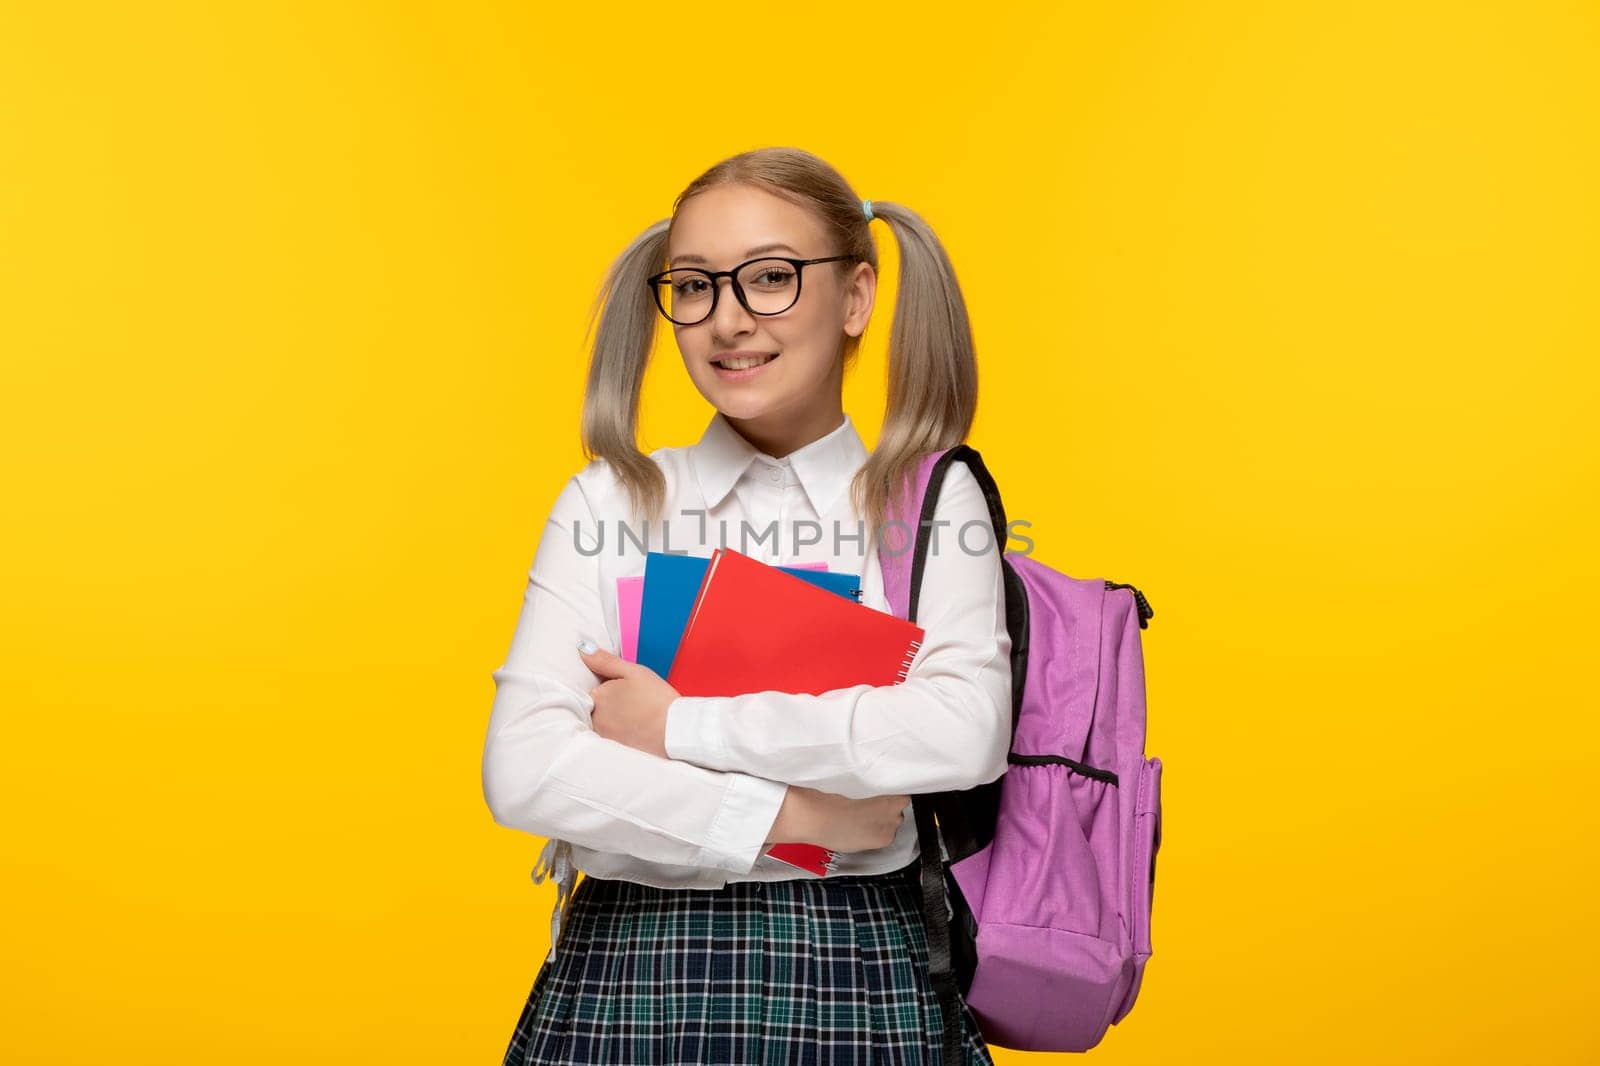 world book day blonde school girl is holding colorful notebooks on yellow background by Kamran